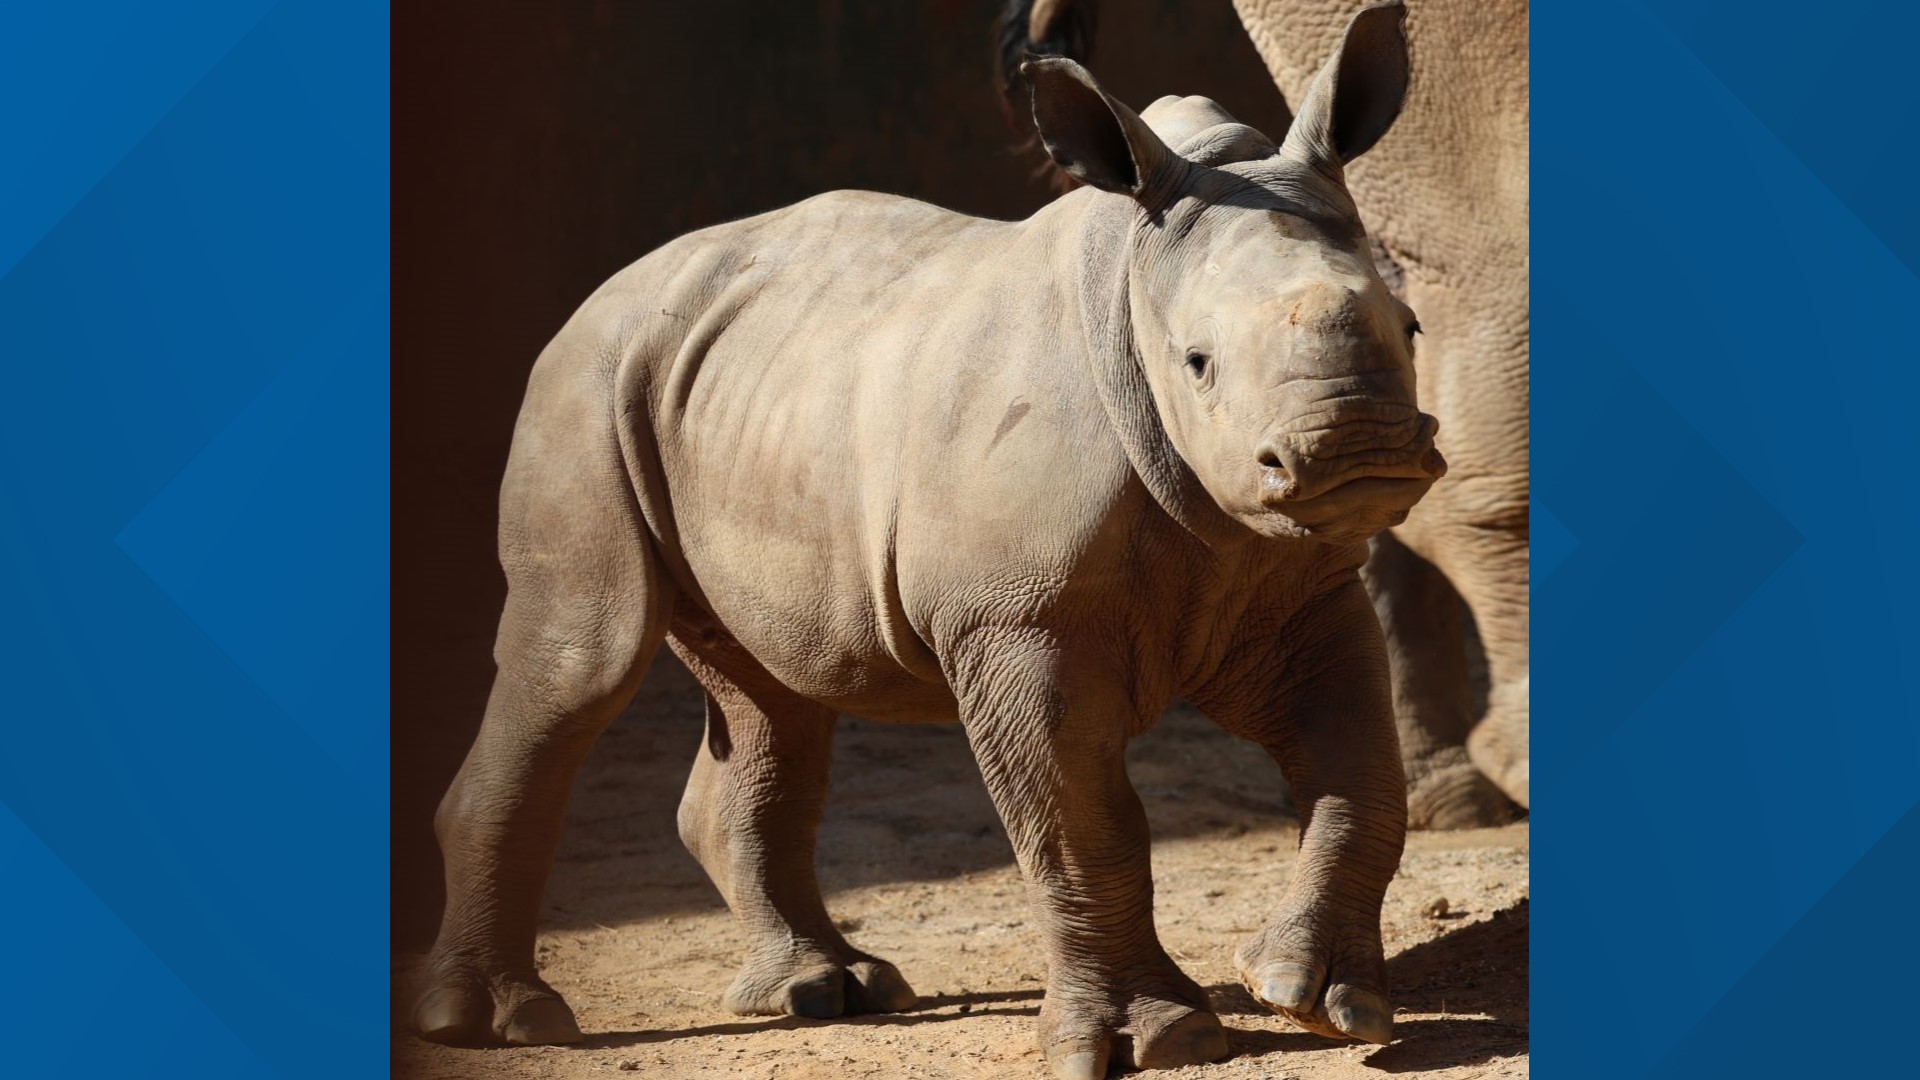 The Zoo’s Rhino Care Team has entered nine names, and seven names will be selected from the public to be entered into the Sweet Sixteen.